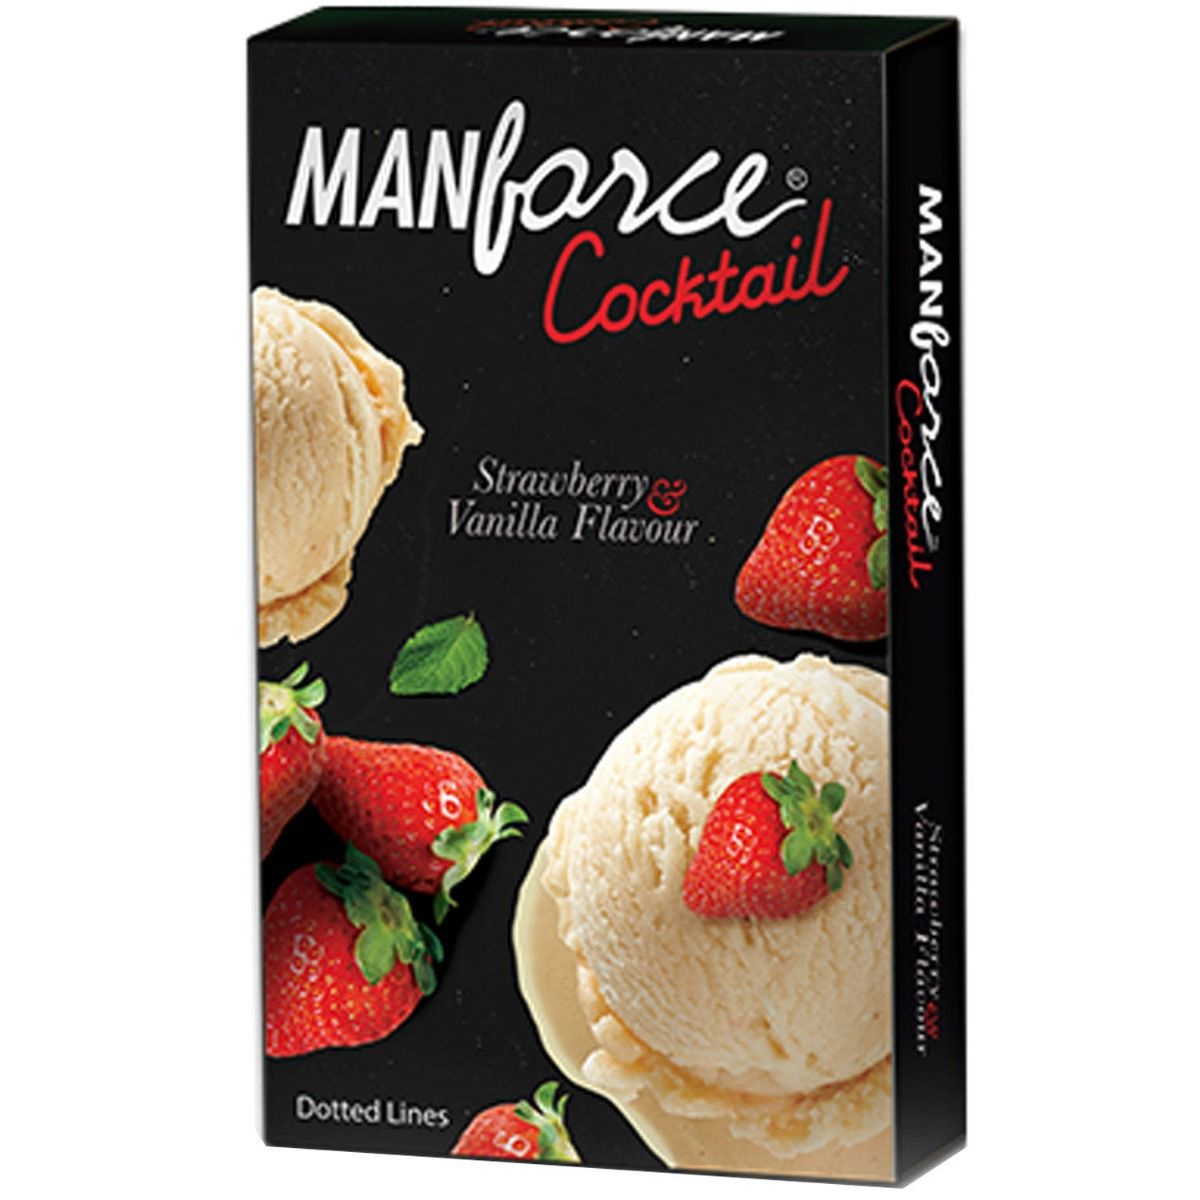 Buy Manforce Cocktail Strawberry and Vanilla Flavoured Condoms, 10 Count Online